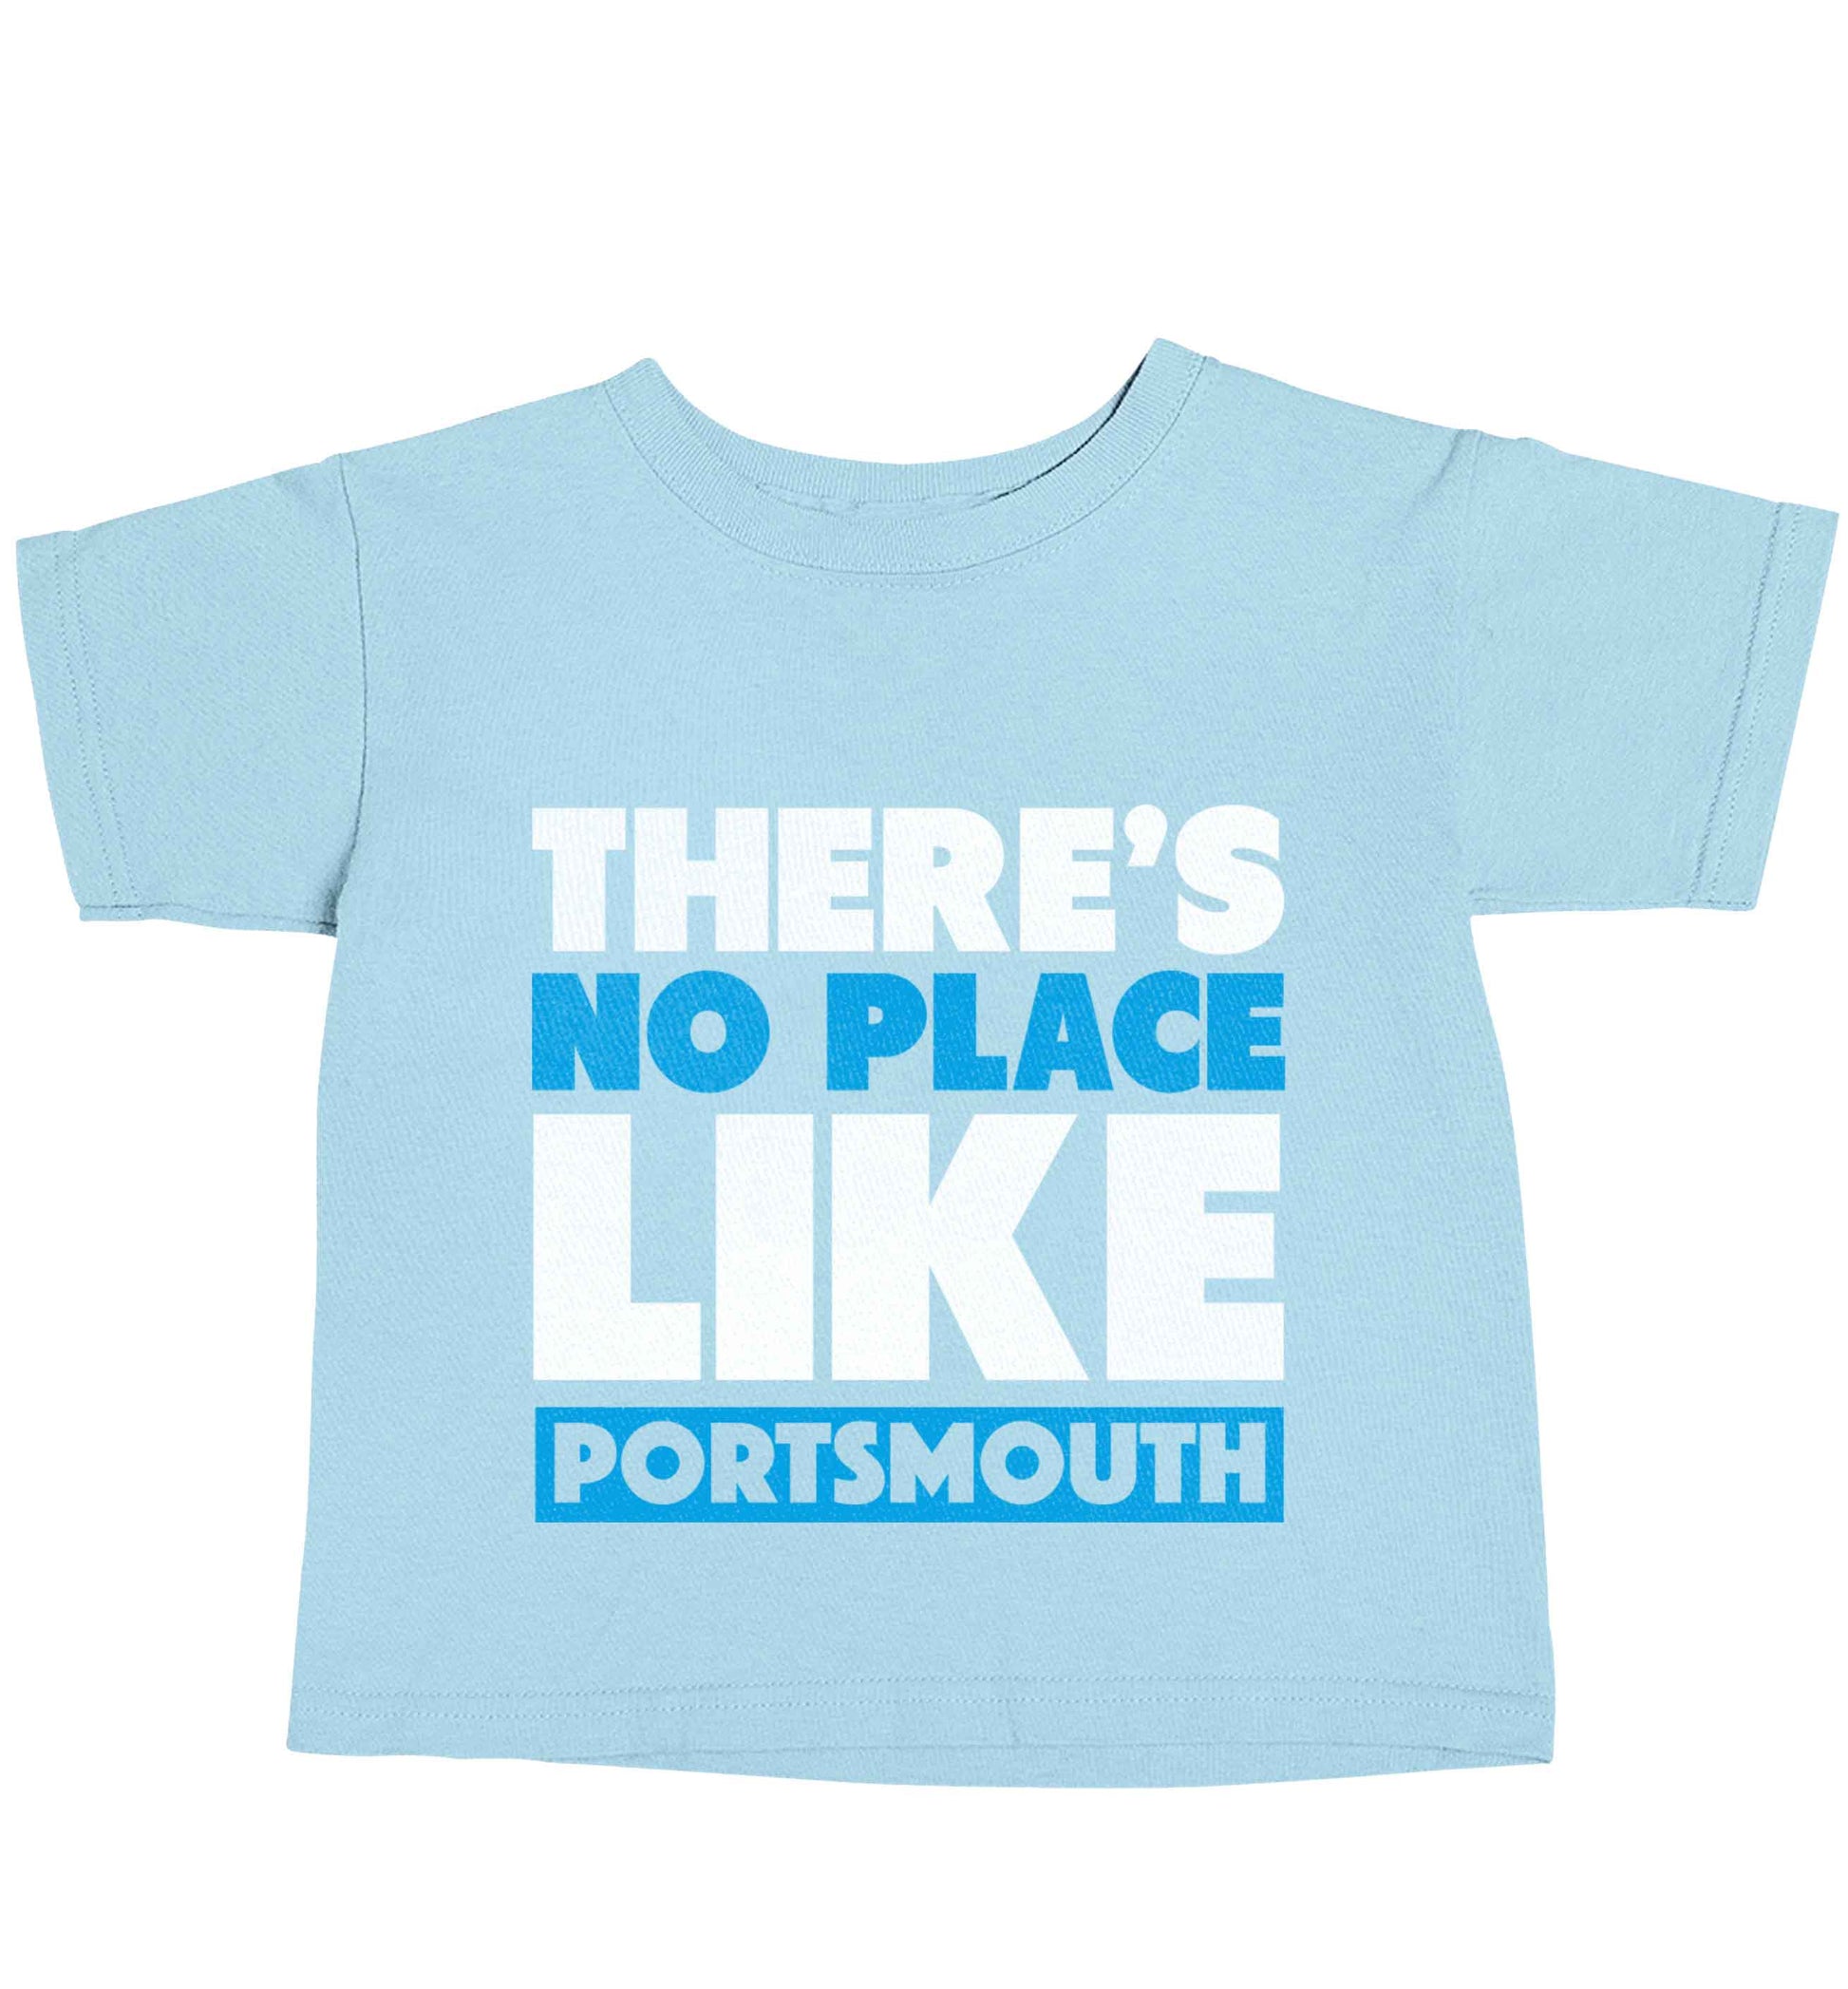 There's no place like Porstmouth light blue baby toddler Tshirt 2 Years